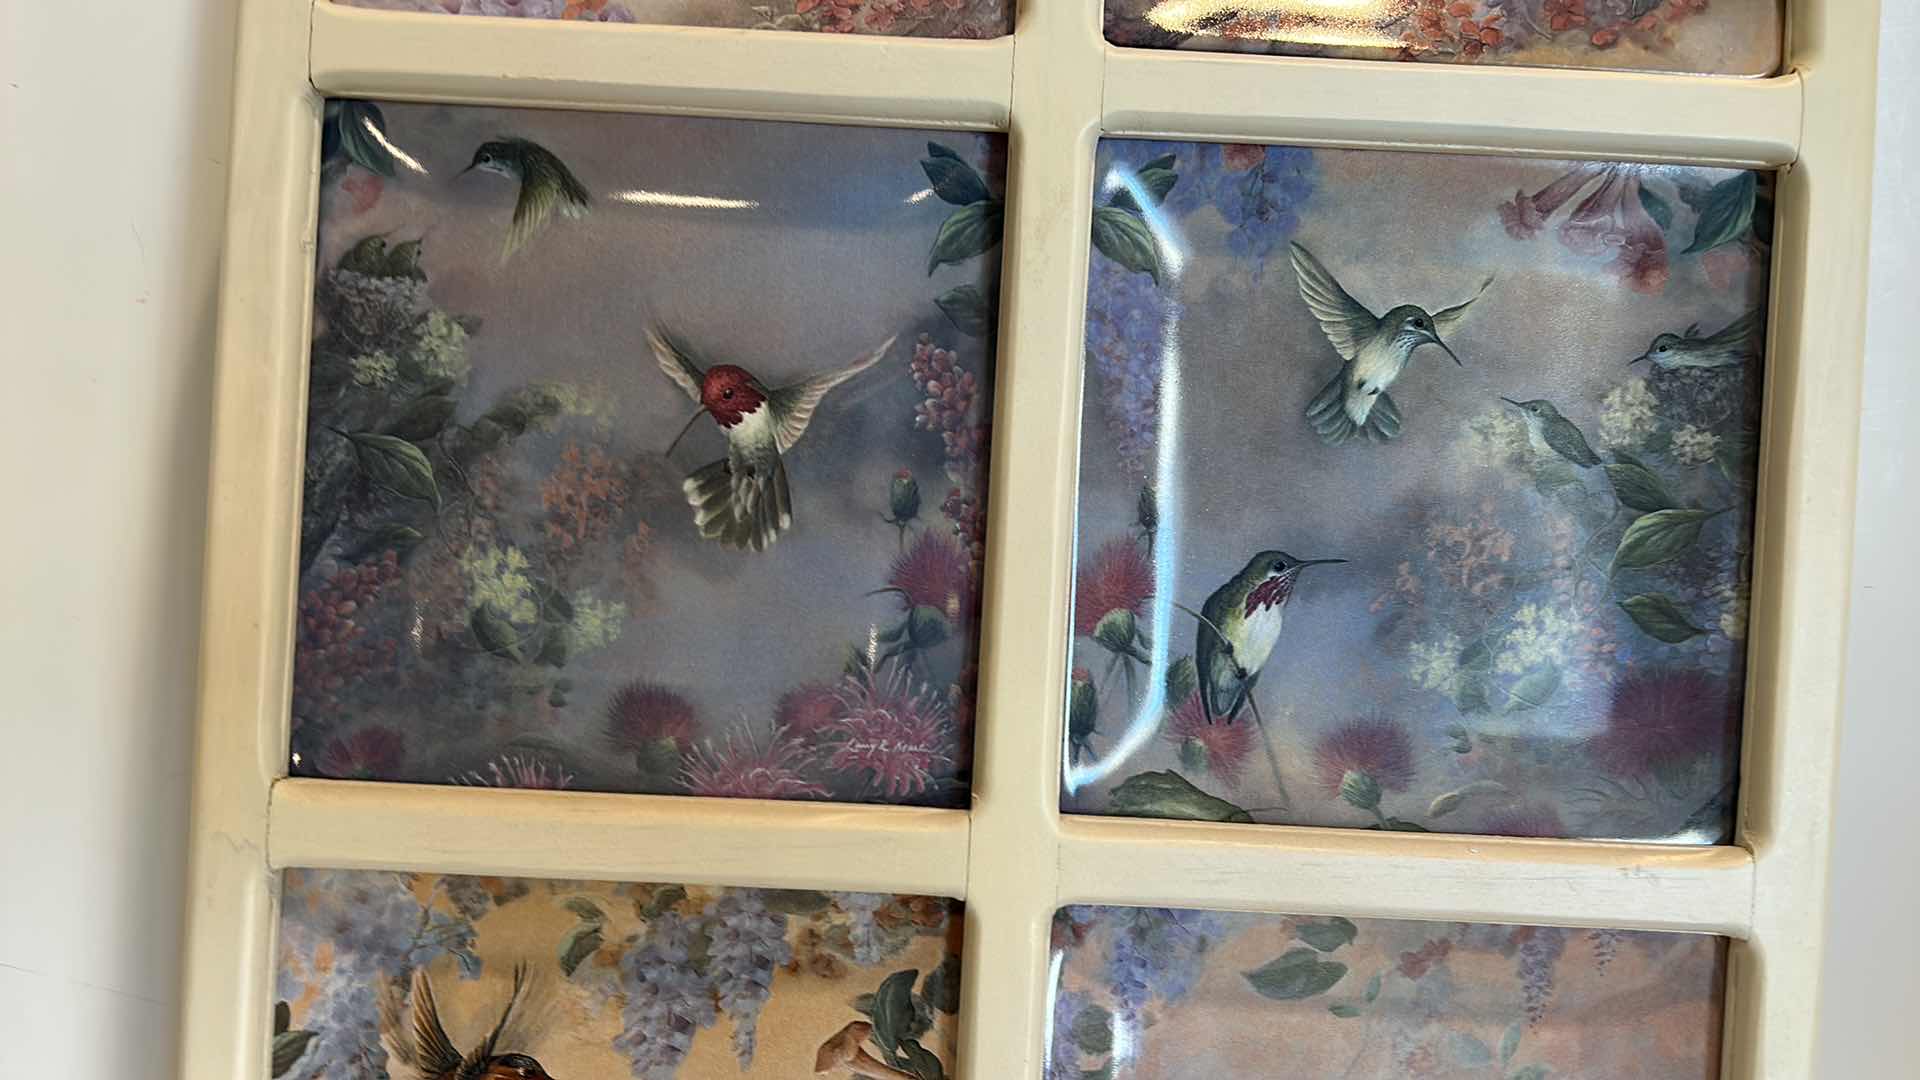 Photo 3 of WINDOW PANE WITH 6 COLLECTIBLE PORCELAIN “A GARDEN OF LITTLE JEWELS” PLATES NUMBERED BY LARRY MARTIN 14 1/4” x 22 1/4”